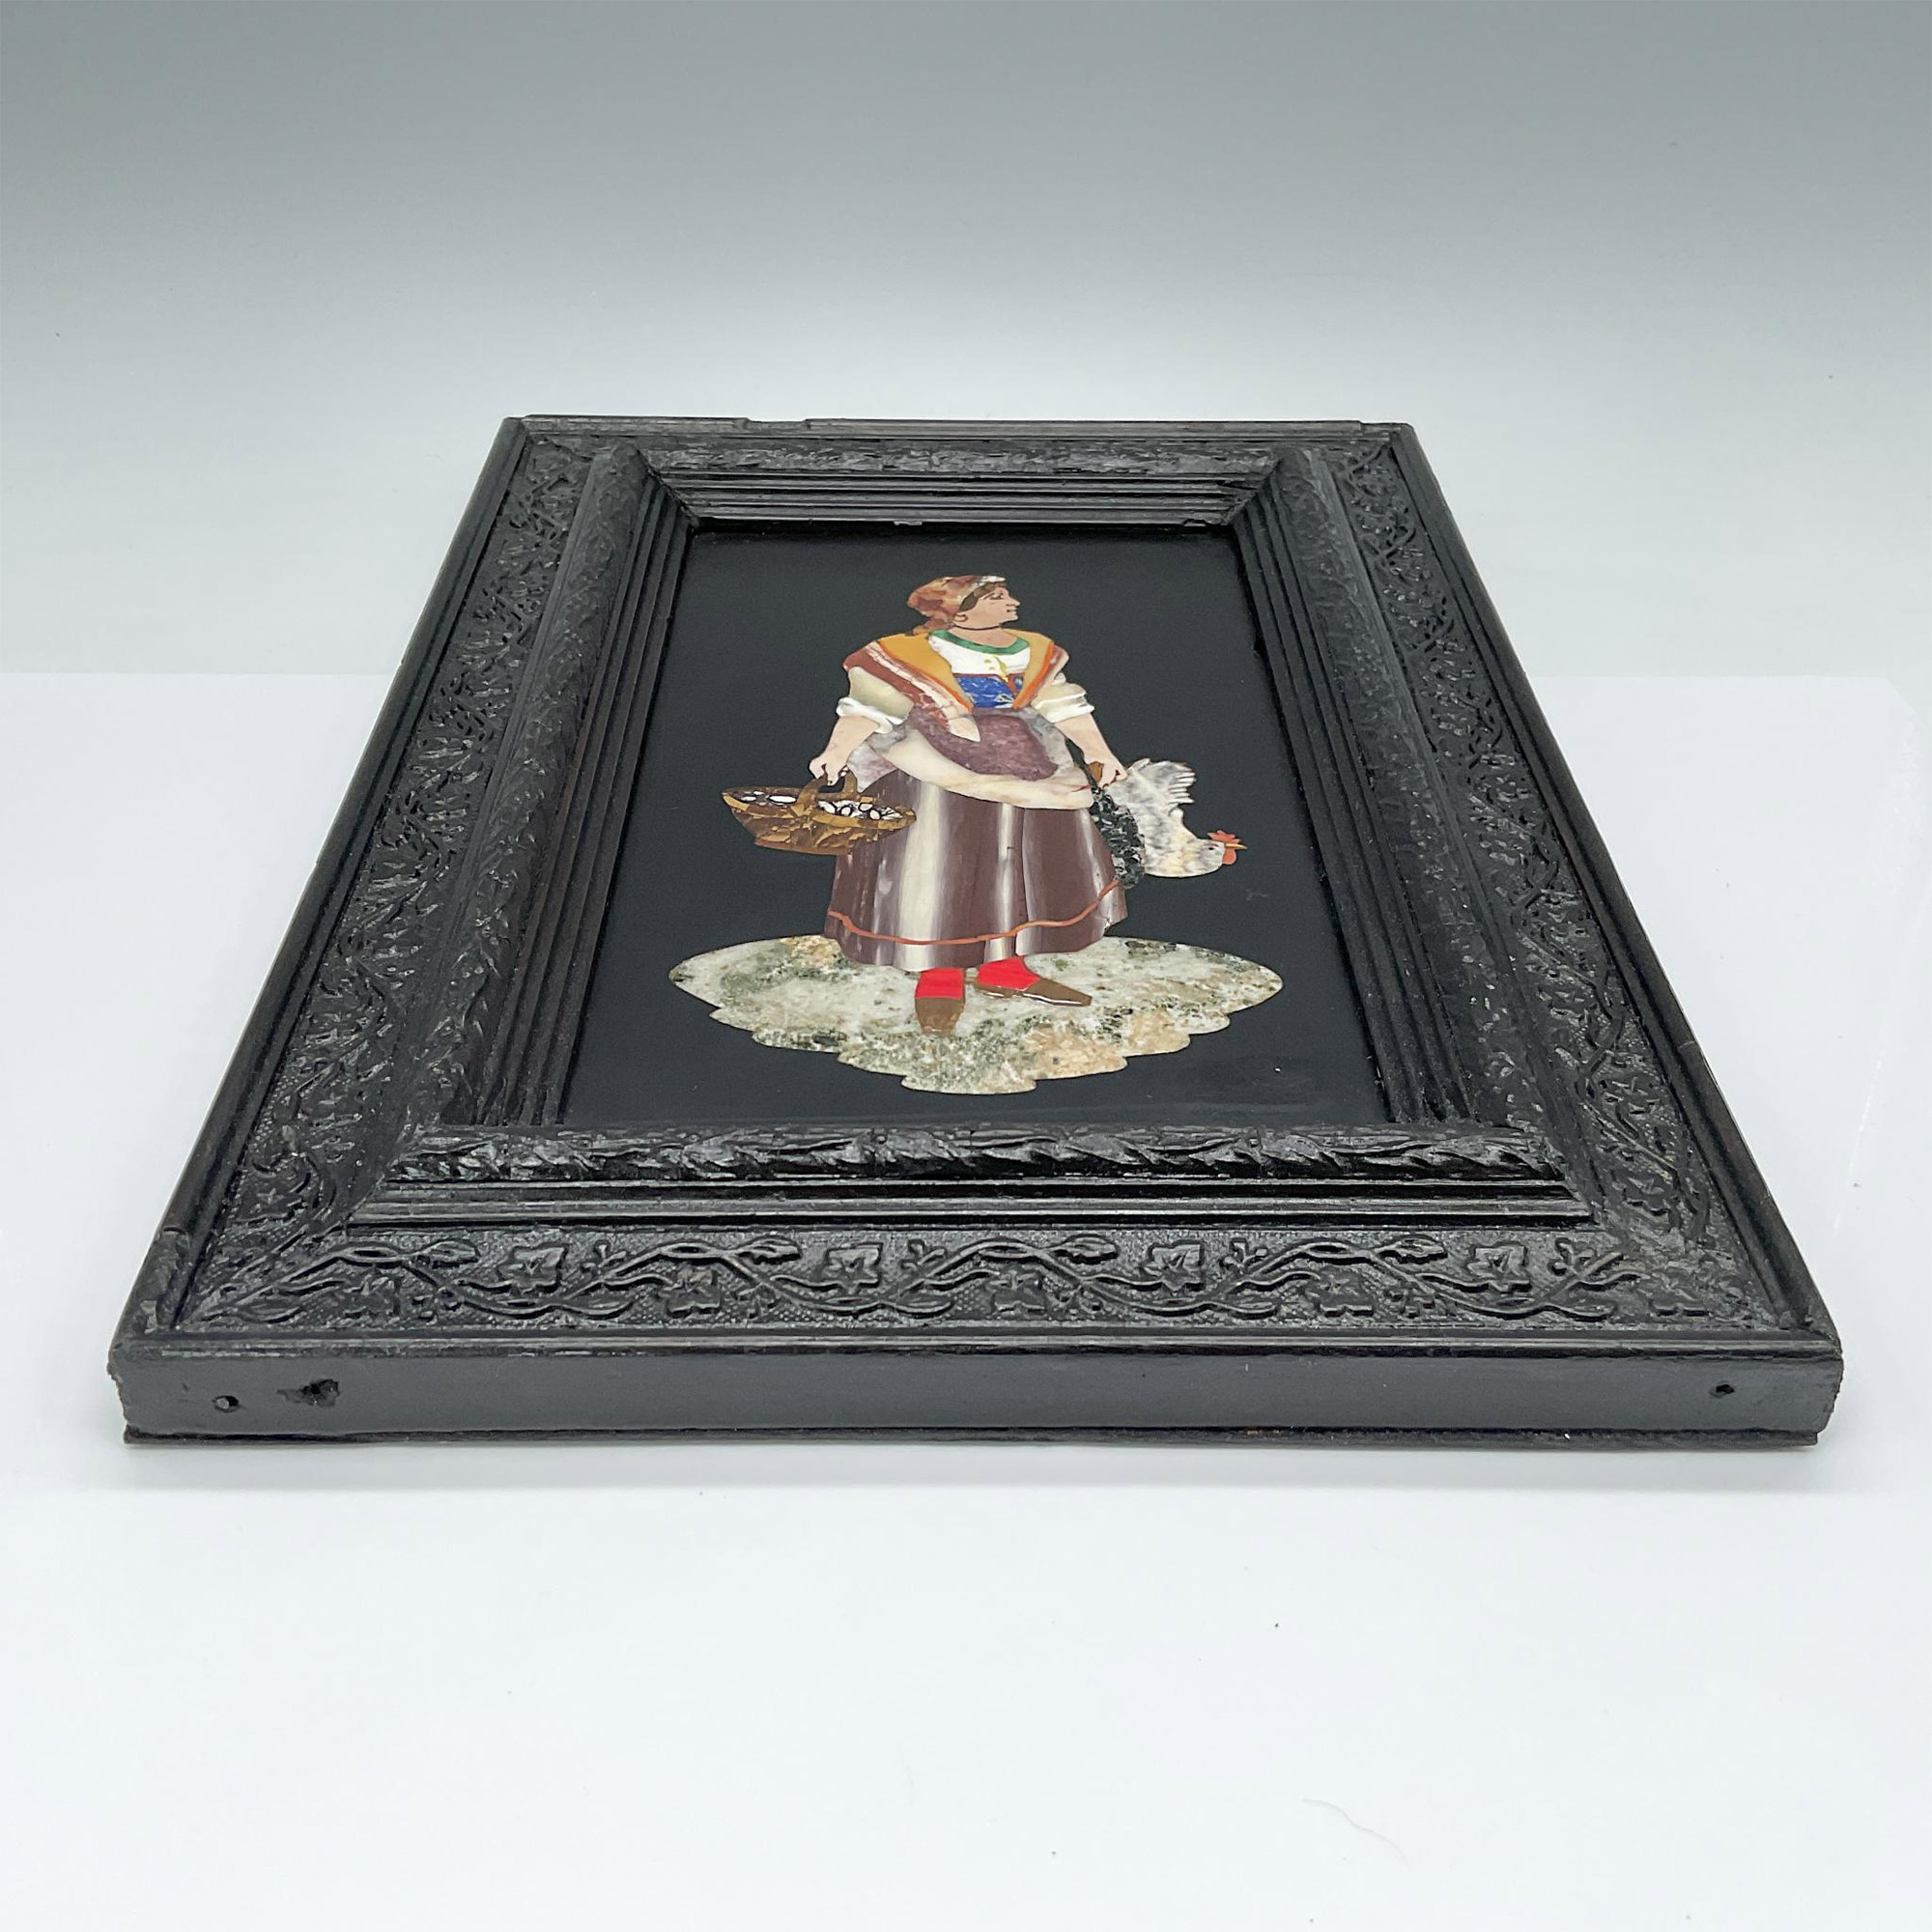 Antique Framed Pietra Dura Plaque, Lady with Chicken - Image 4 of 5